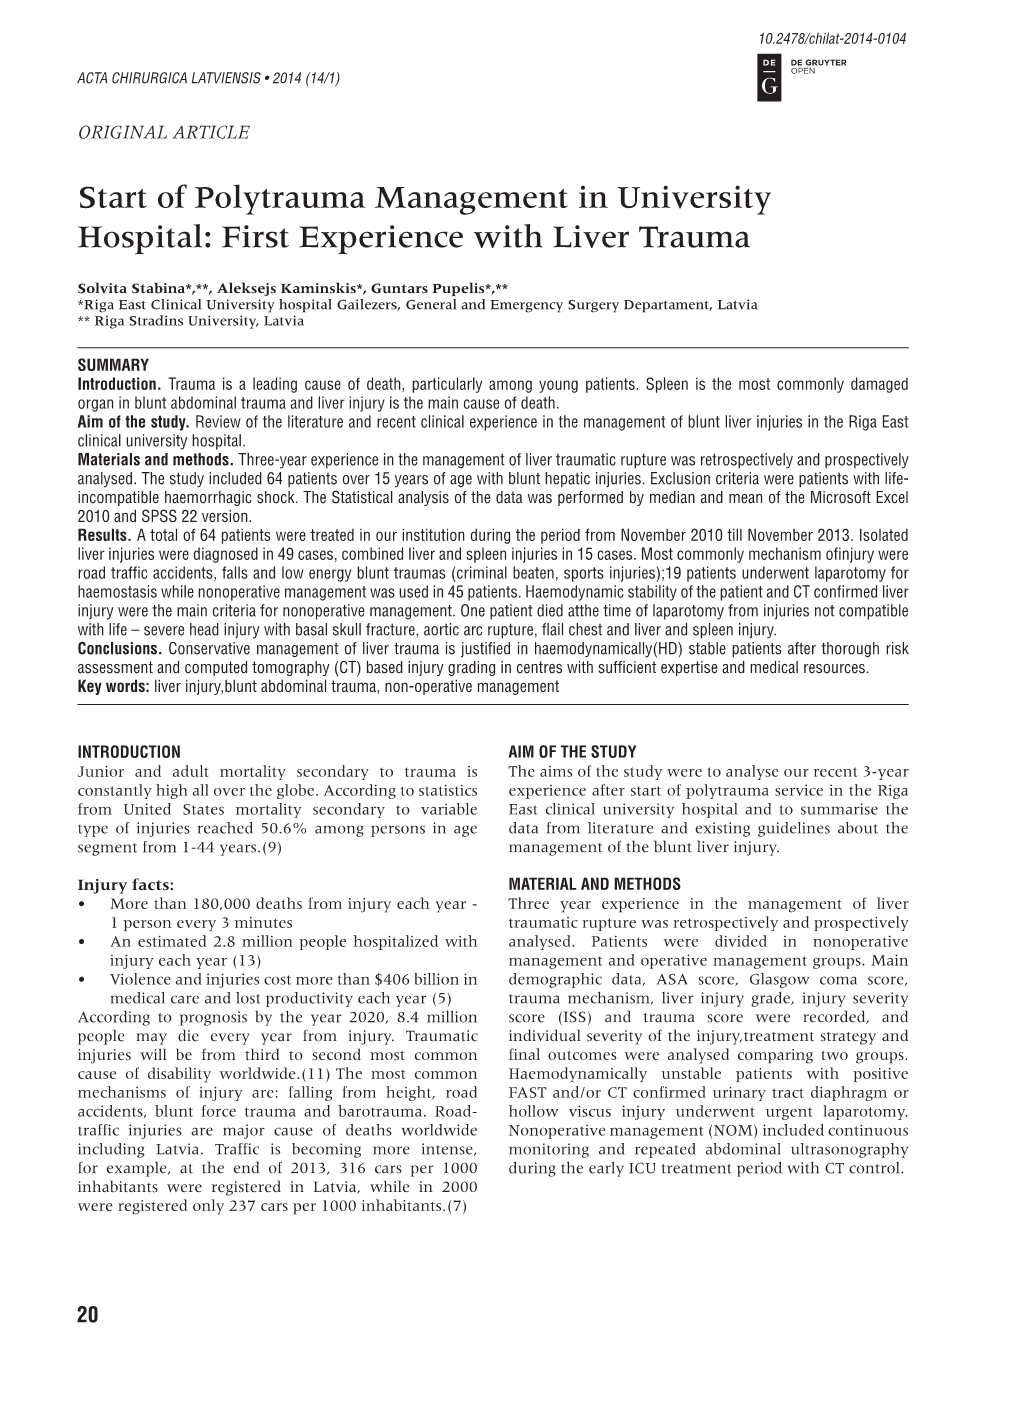 Of Polytrauma Management in University Hospital: First Experience with Liver Trauma